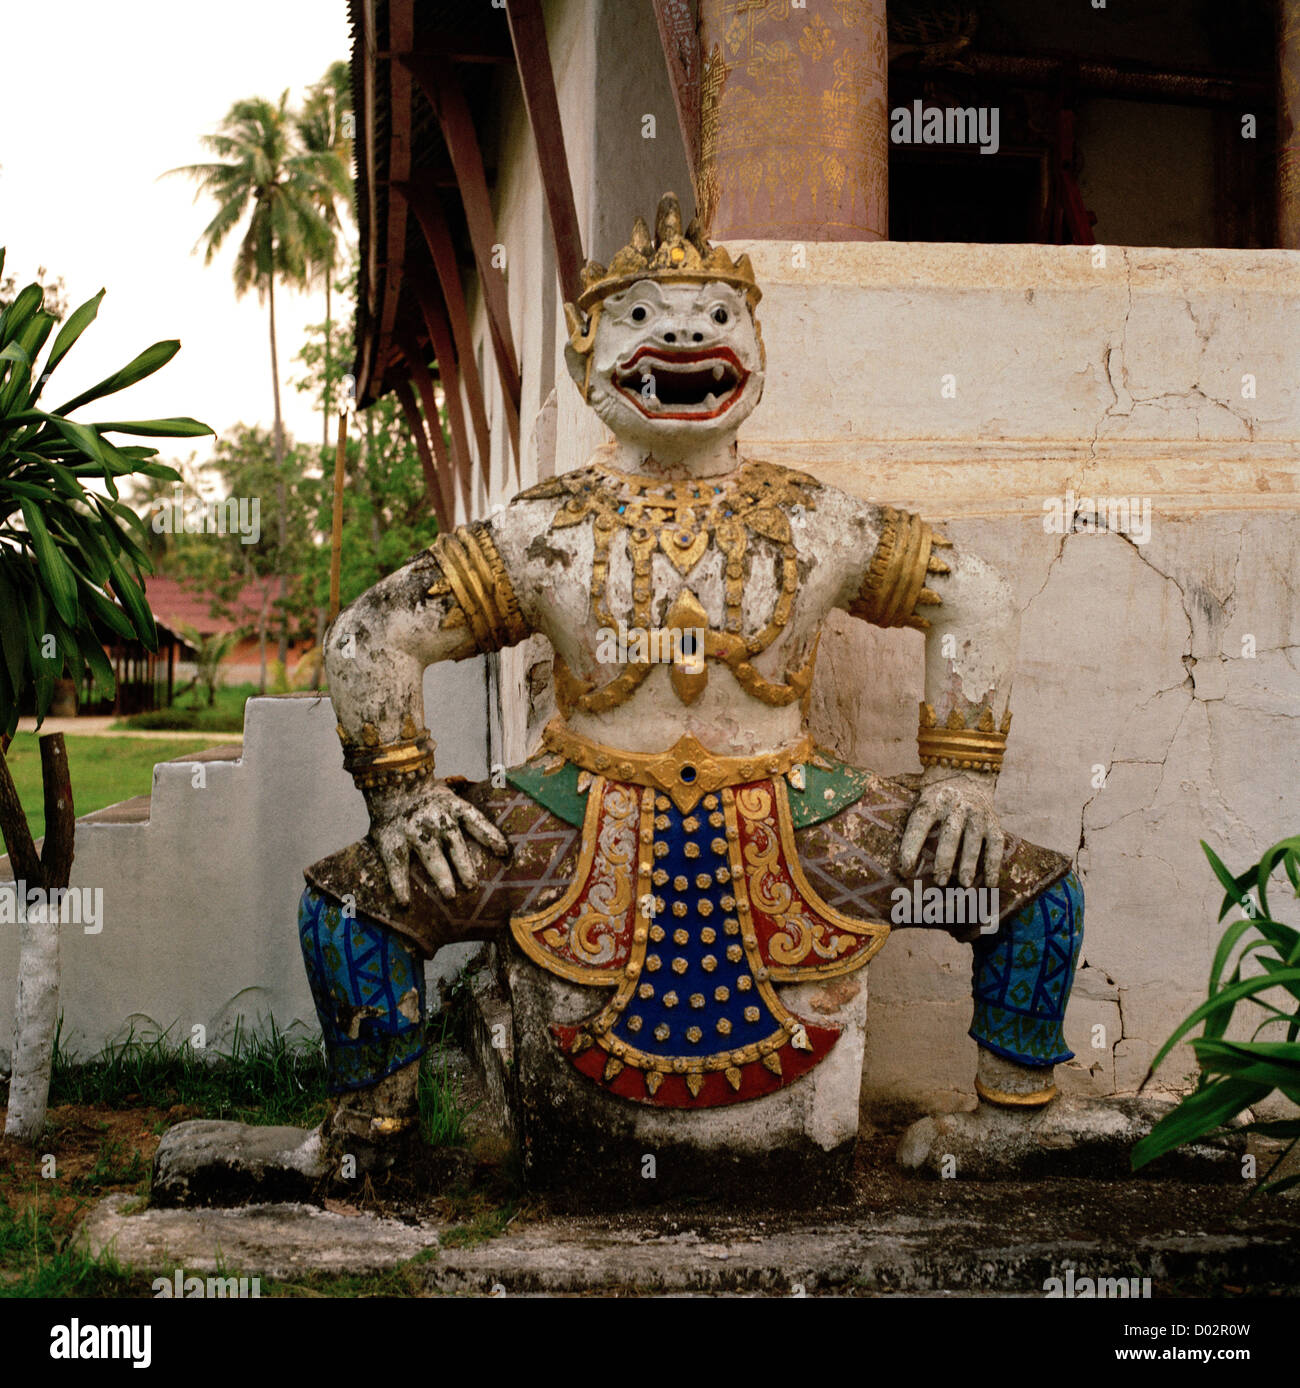 Demonic sculpture standing guard outside Buddhist temple Wat Aham in Luang Prabang in Laos in Indochina in Far East Southeast Asia. Demon Travel Stock Photo